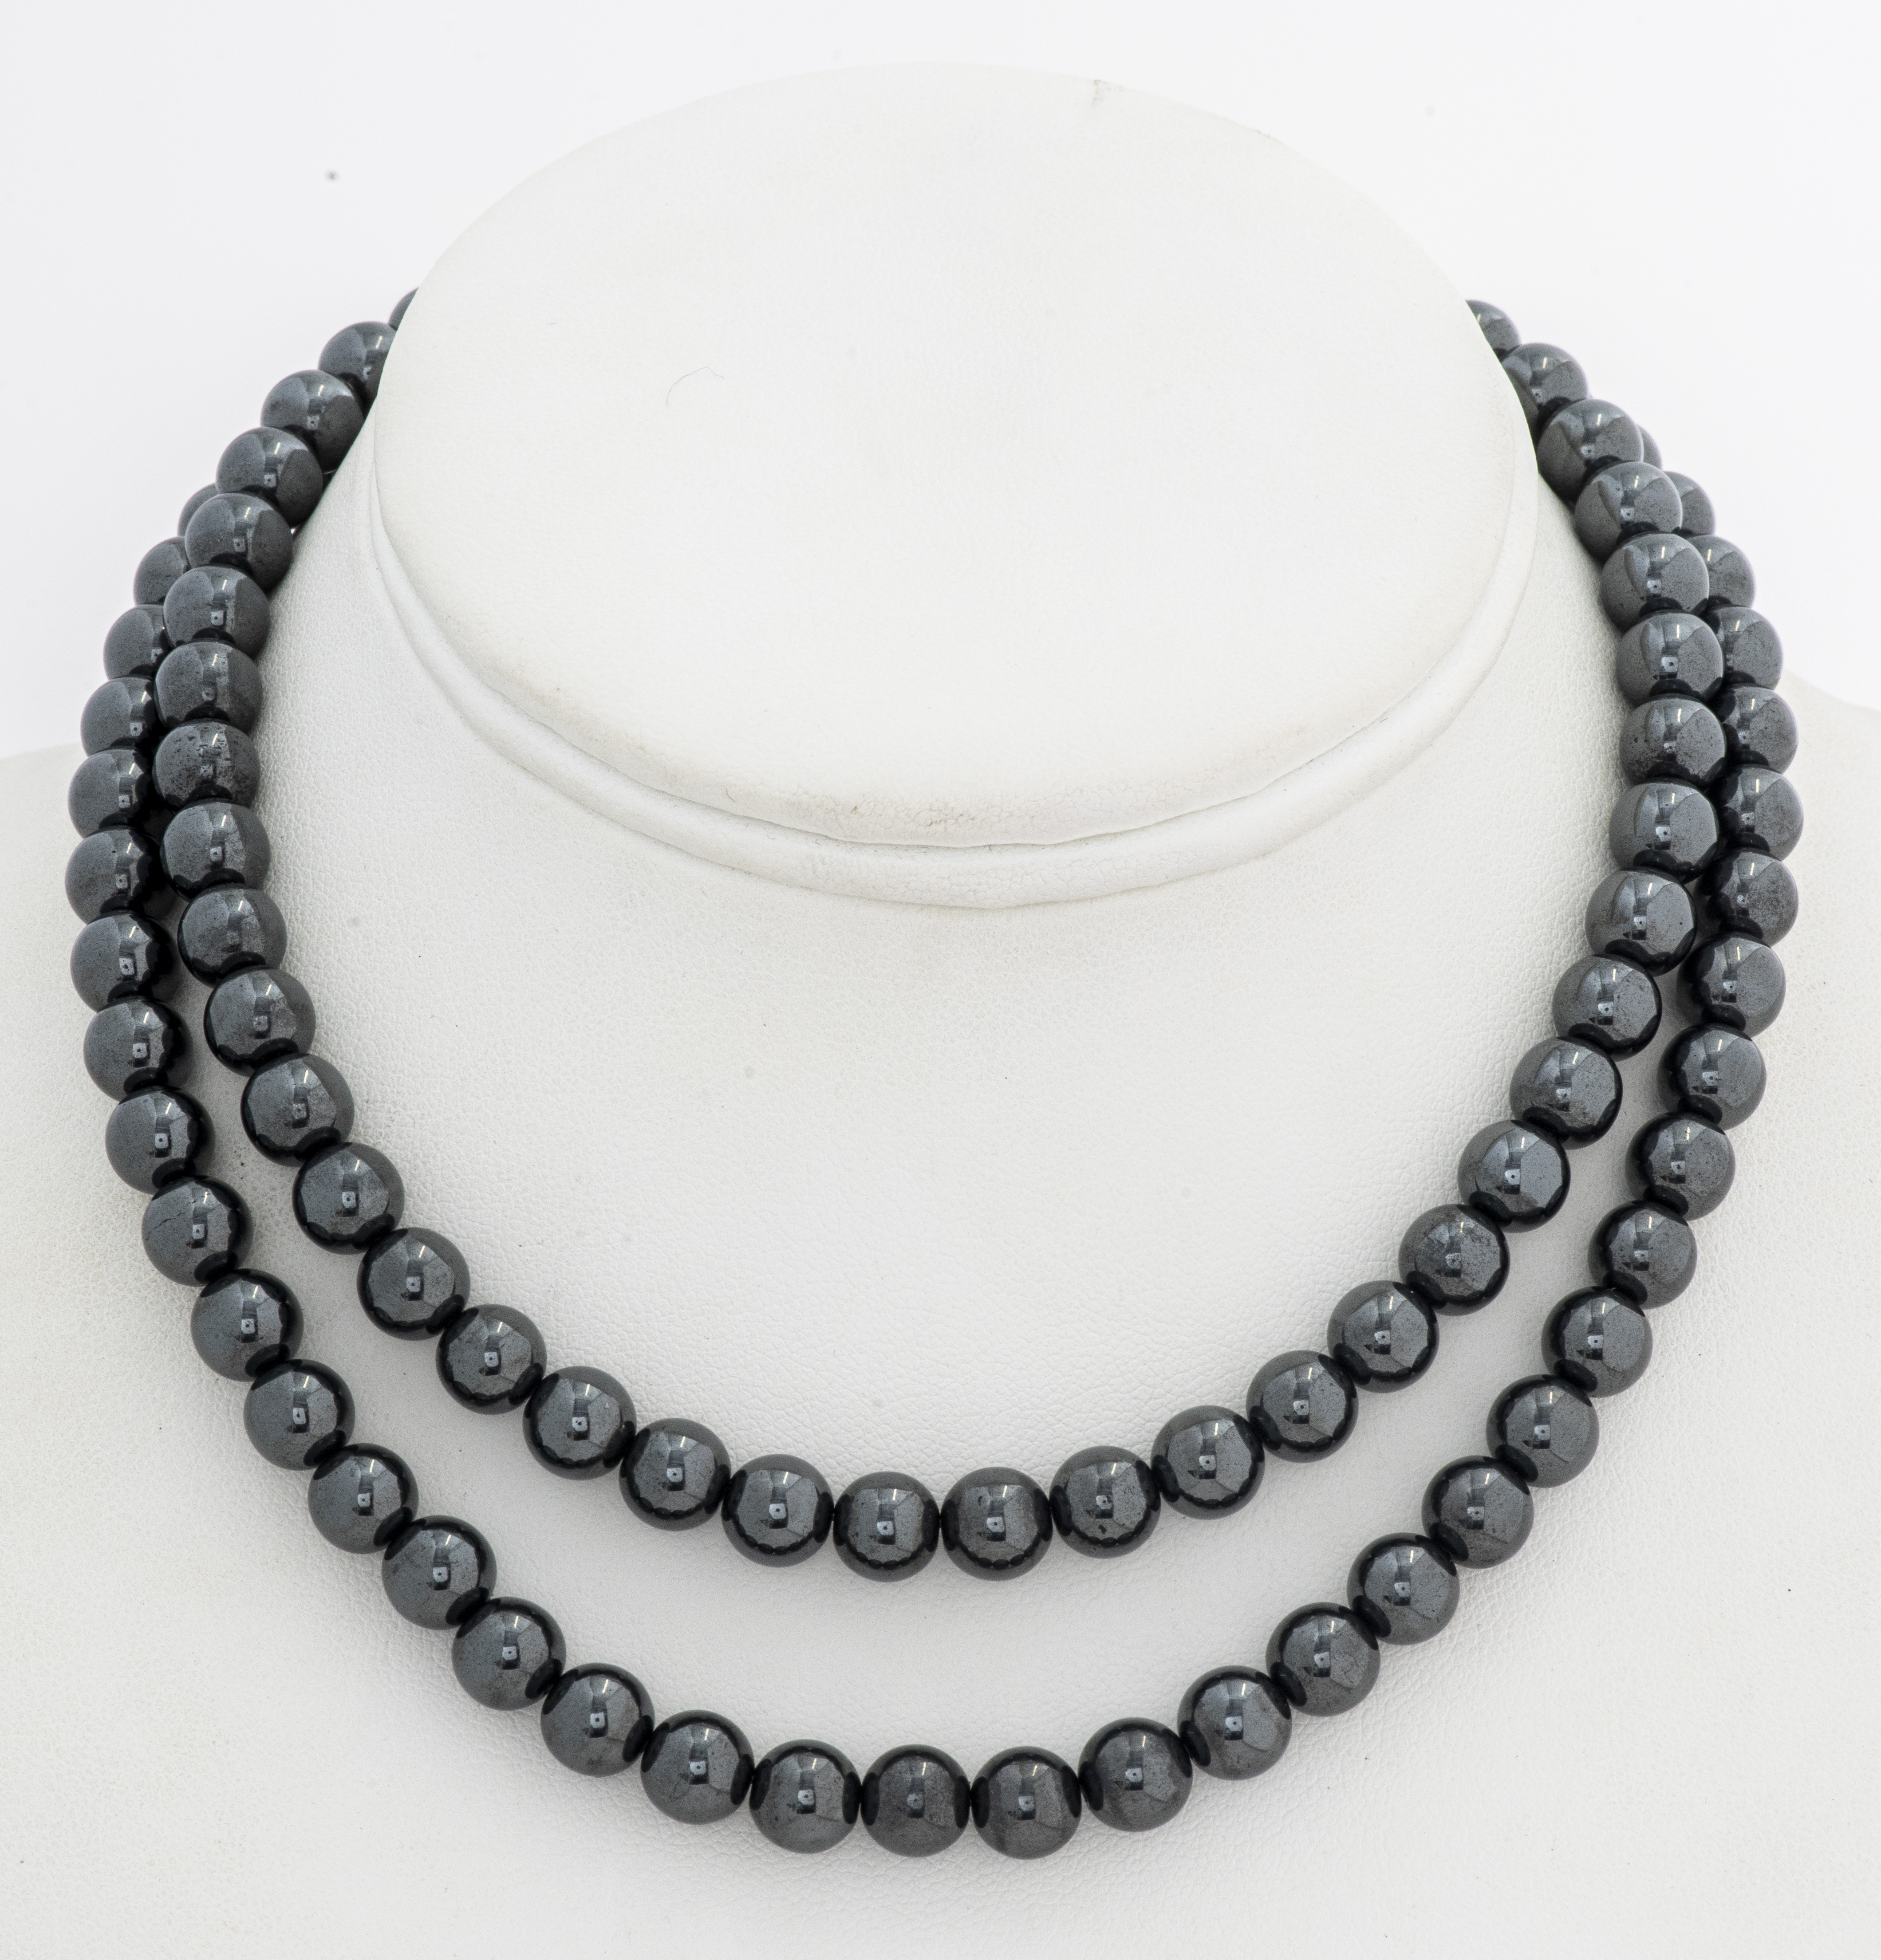 HEMATITE BEAD NECKLACE WITH SILVER-TONE